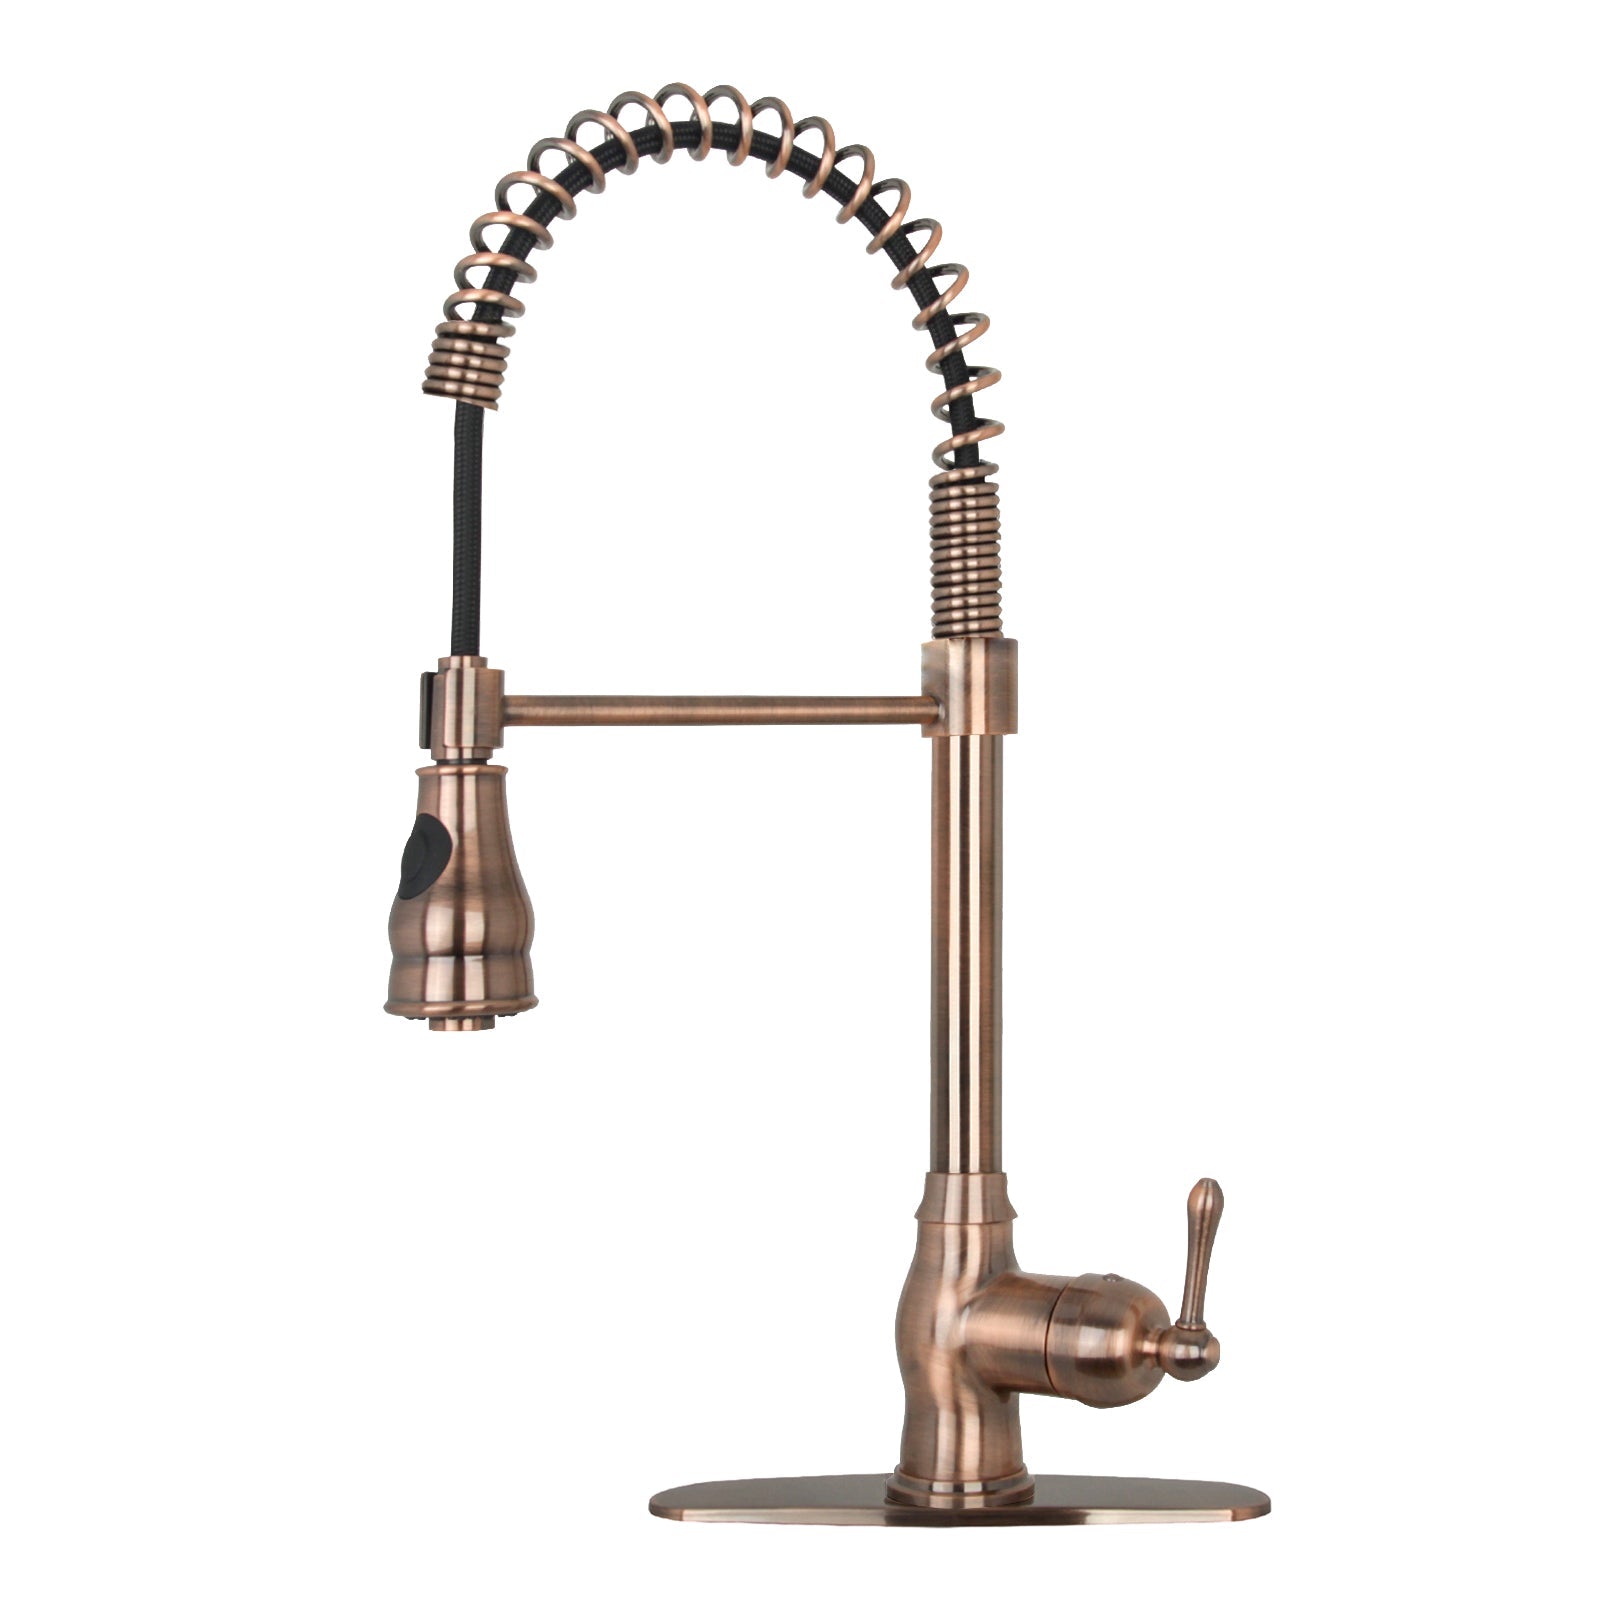 Antique Bronze Pre-Rinse Spring Kitchen Faucet, Single Level Solid Brass Kitchen Sink Faucets with Pull Down Sprayer - AK96518-AB